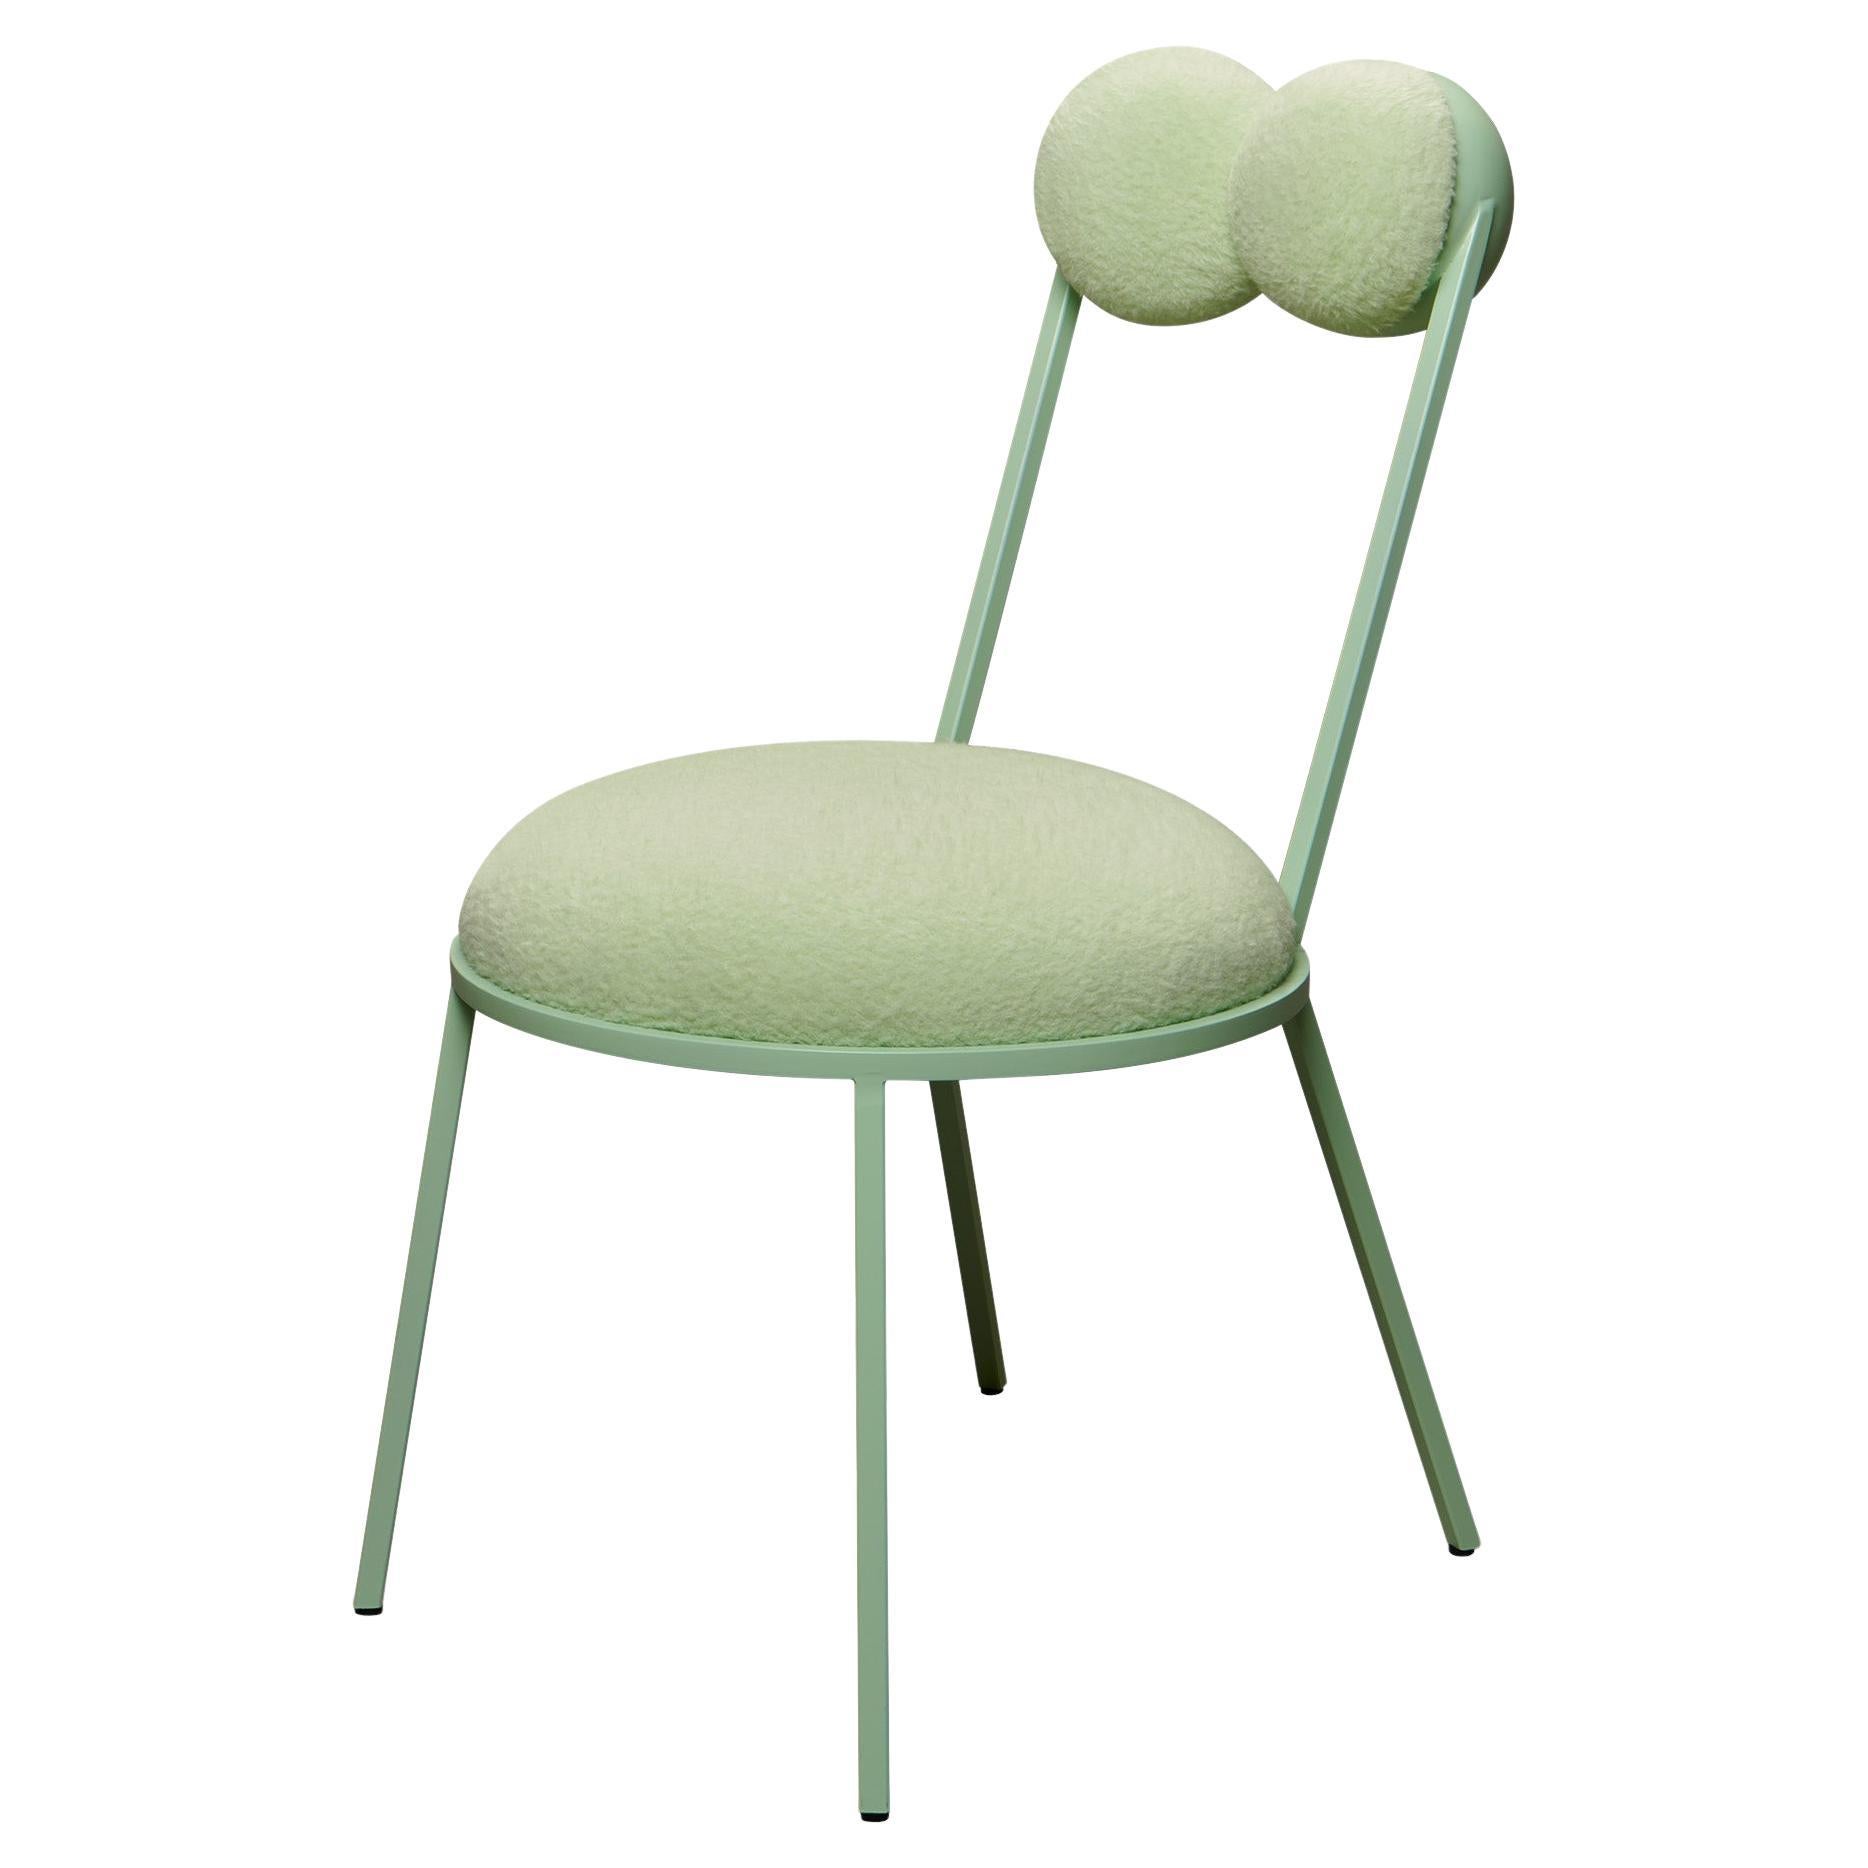 Trevor Sculptural Dining Chair Mint Green Frame and Wool by Lara Bohinc 